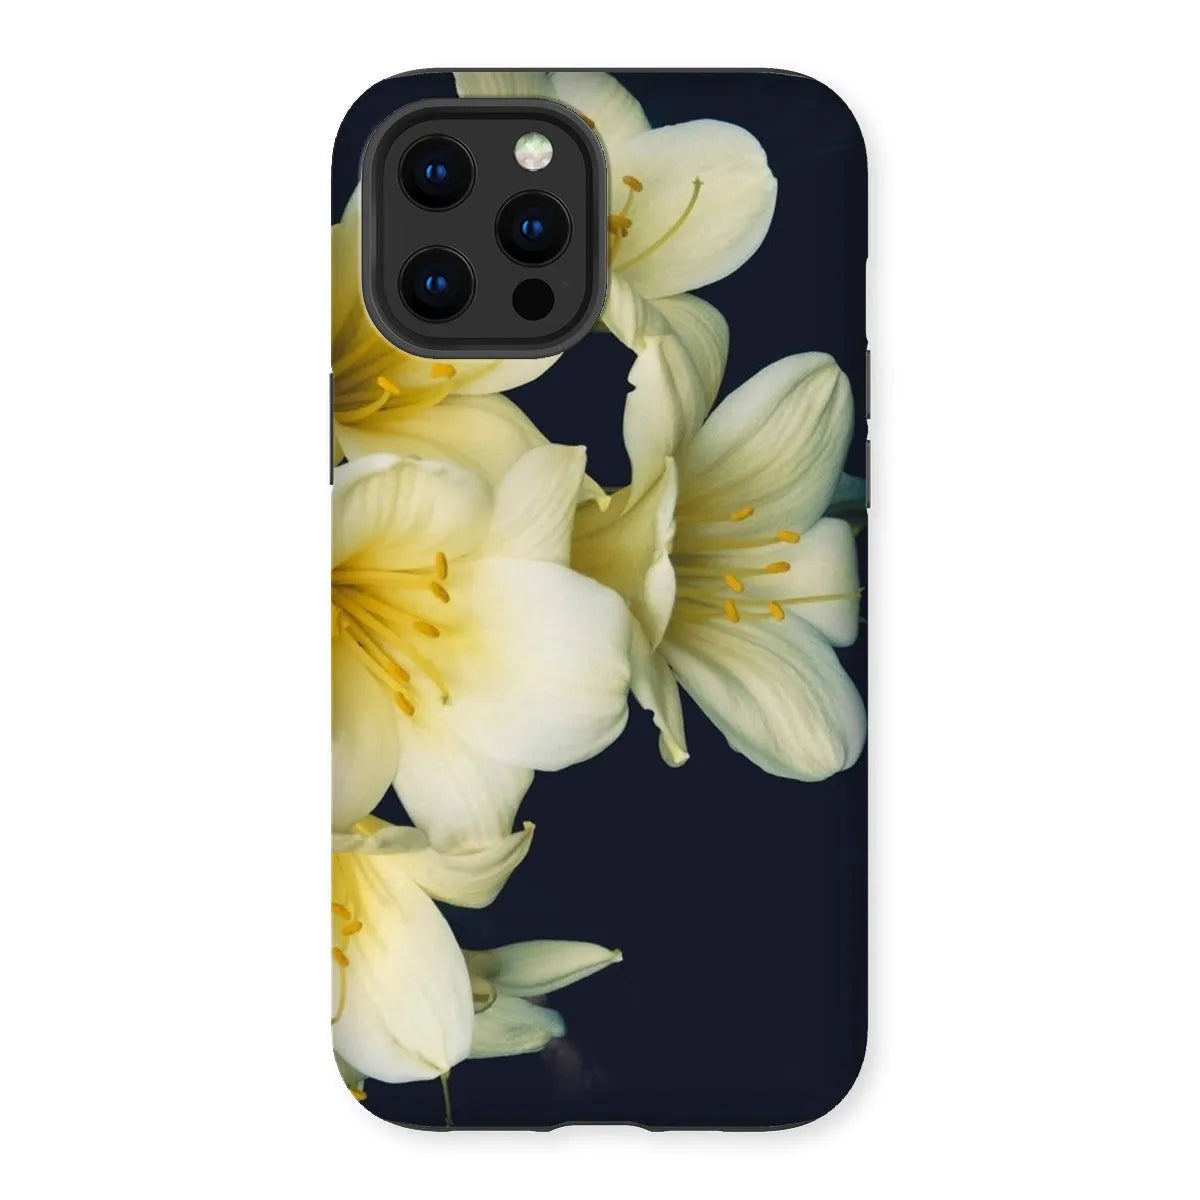 Flower Power Too Tough Phone Case - Iphone 13 Pro Max / Matte - Mobile Phone Cases - Aesthetic Art